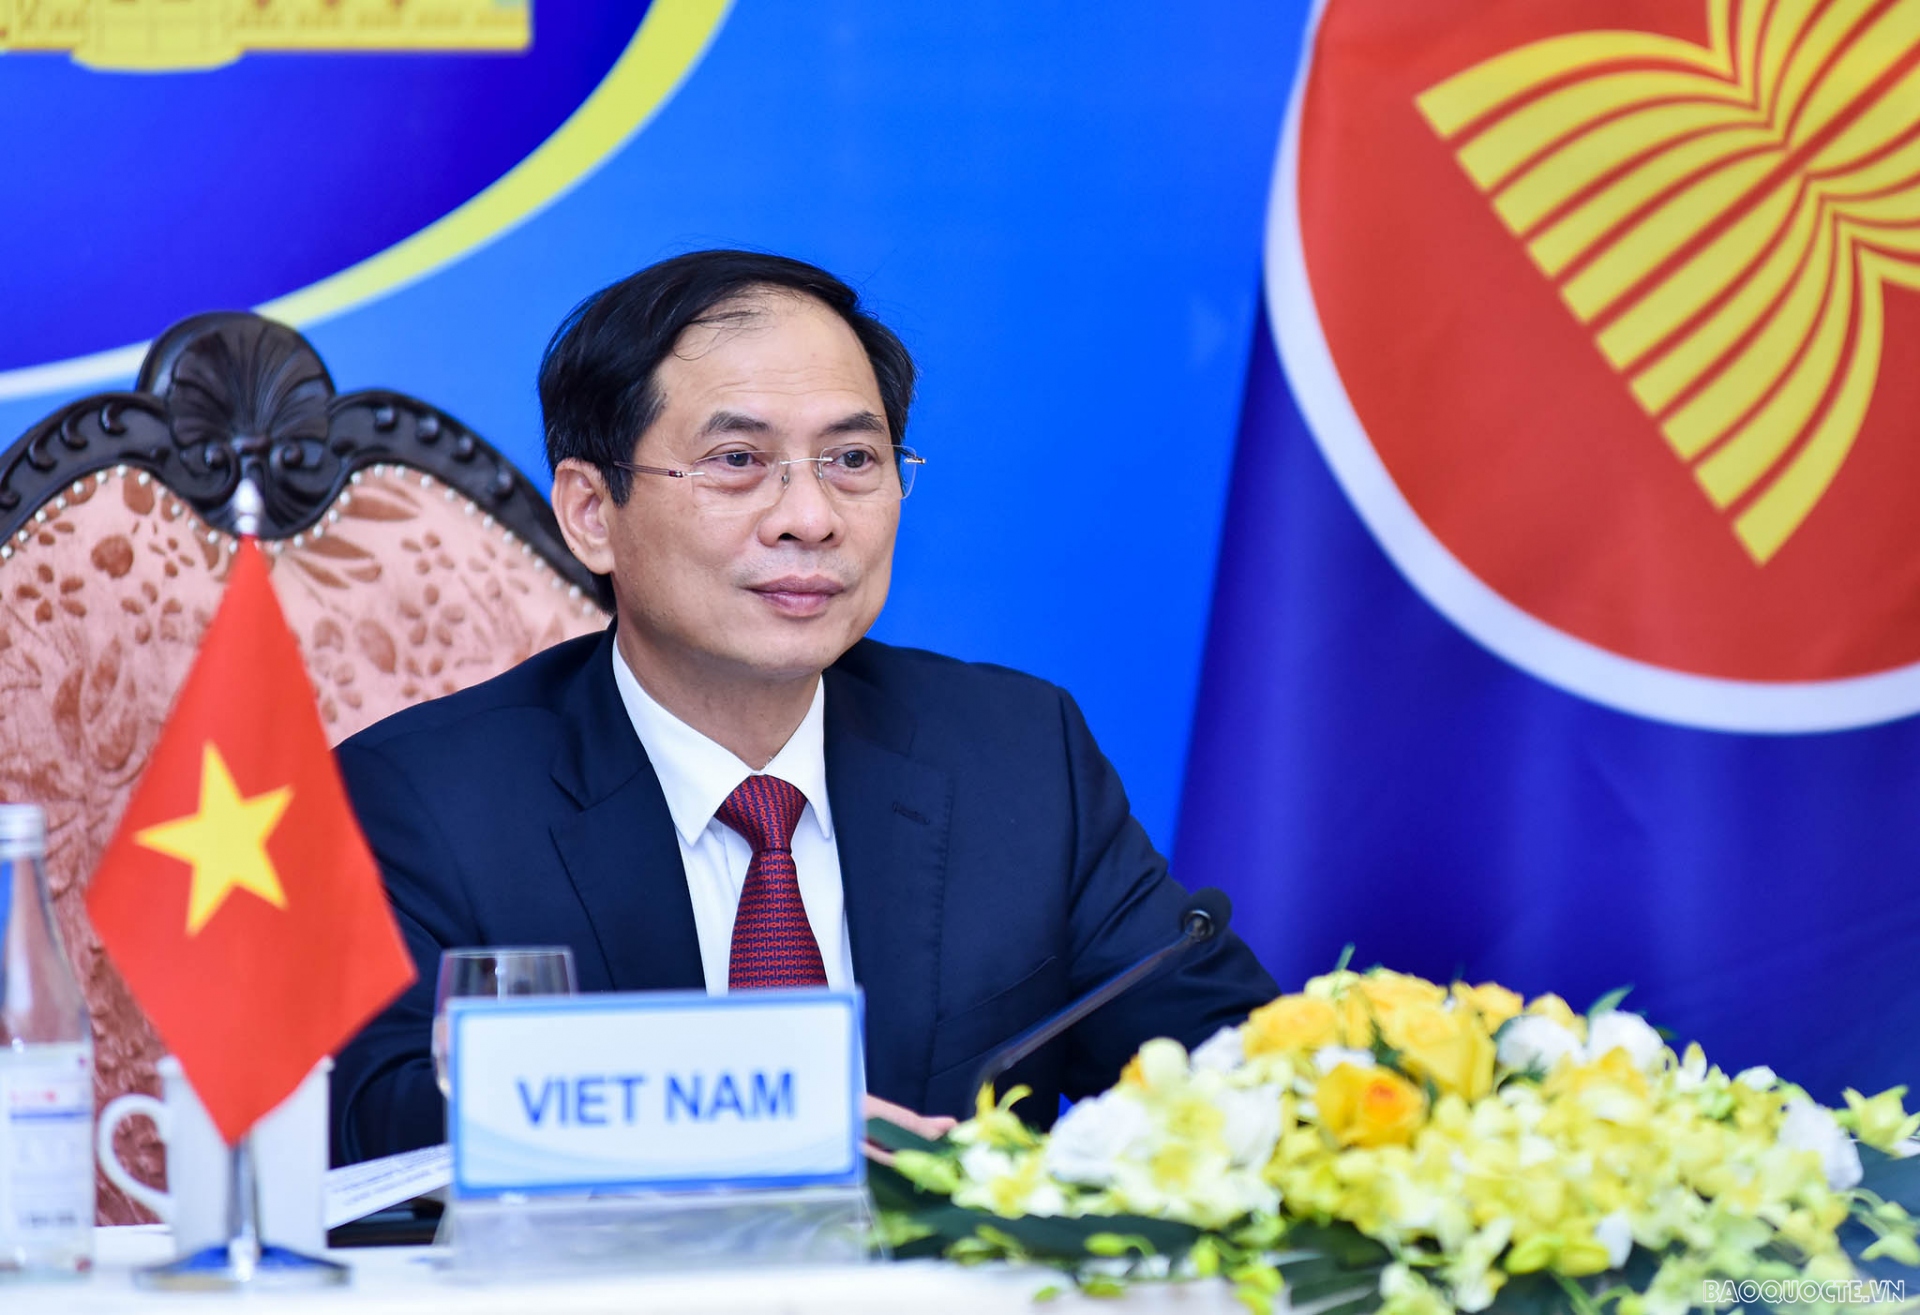 Viet Nam attends 54th ASEAN Foreign Ministers’ Meeting